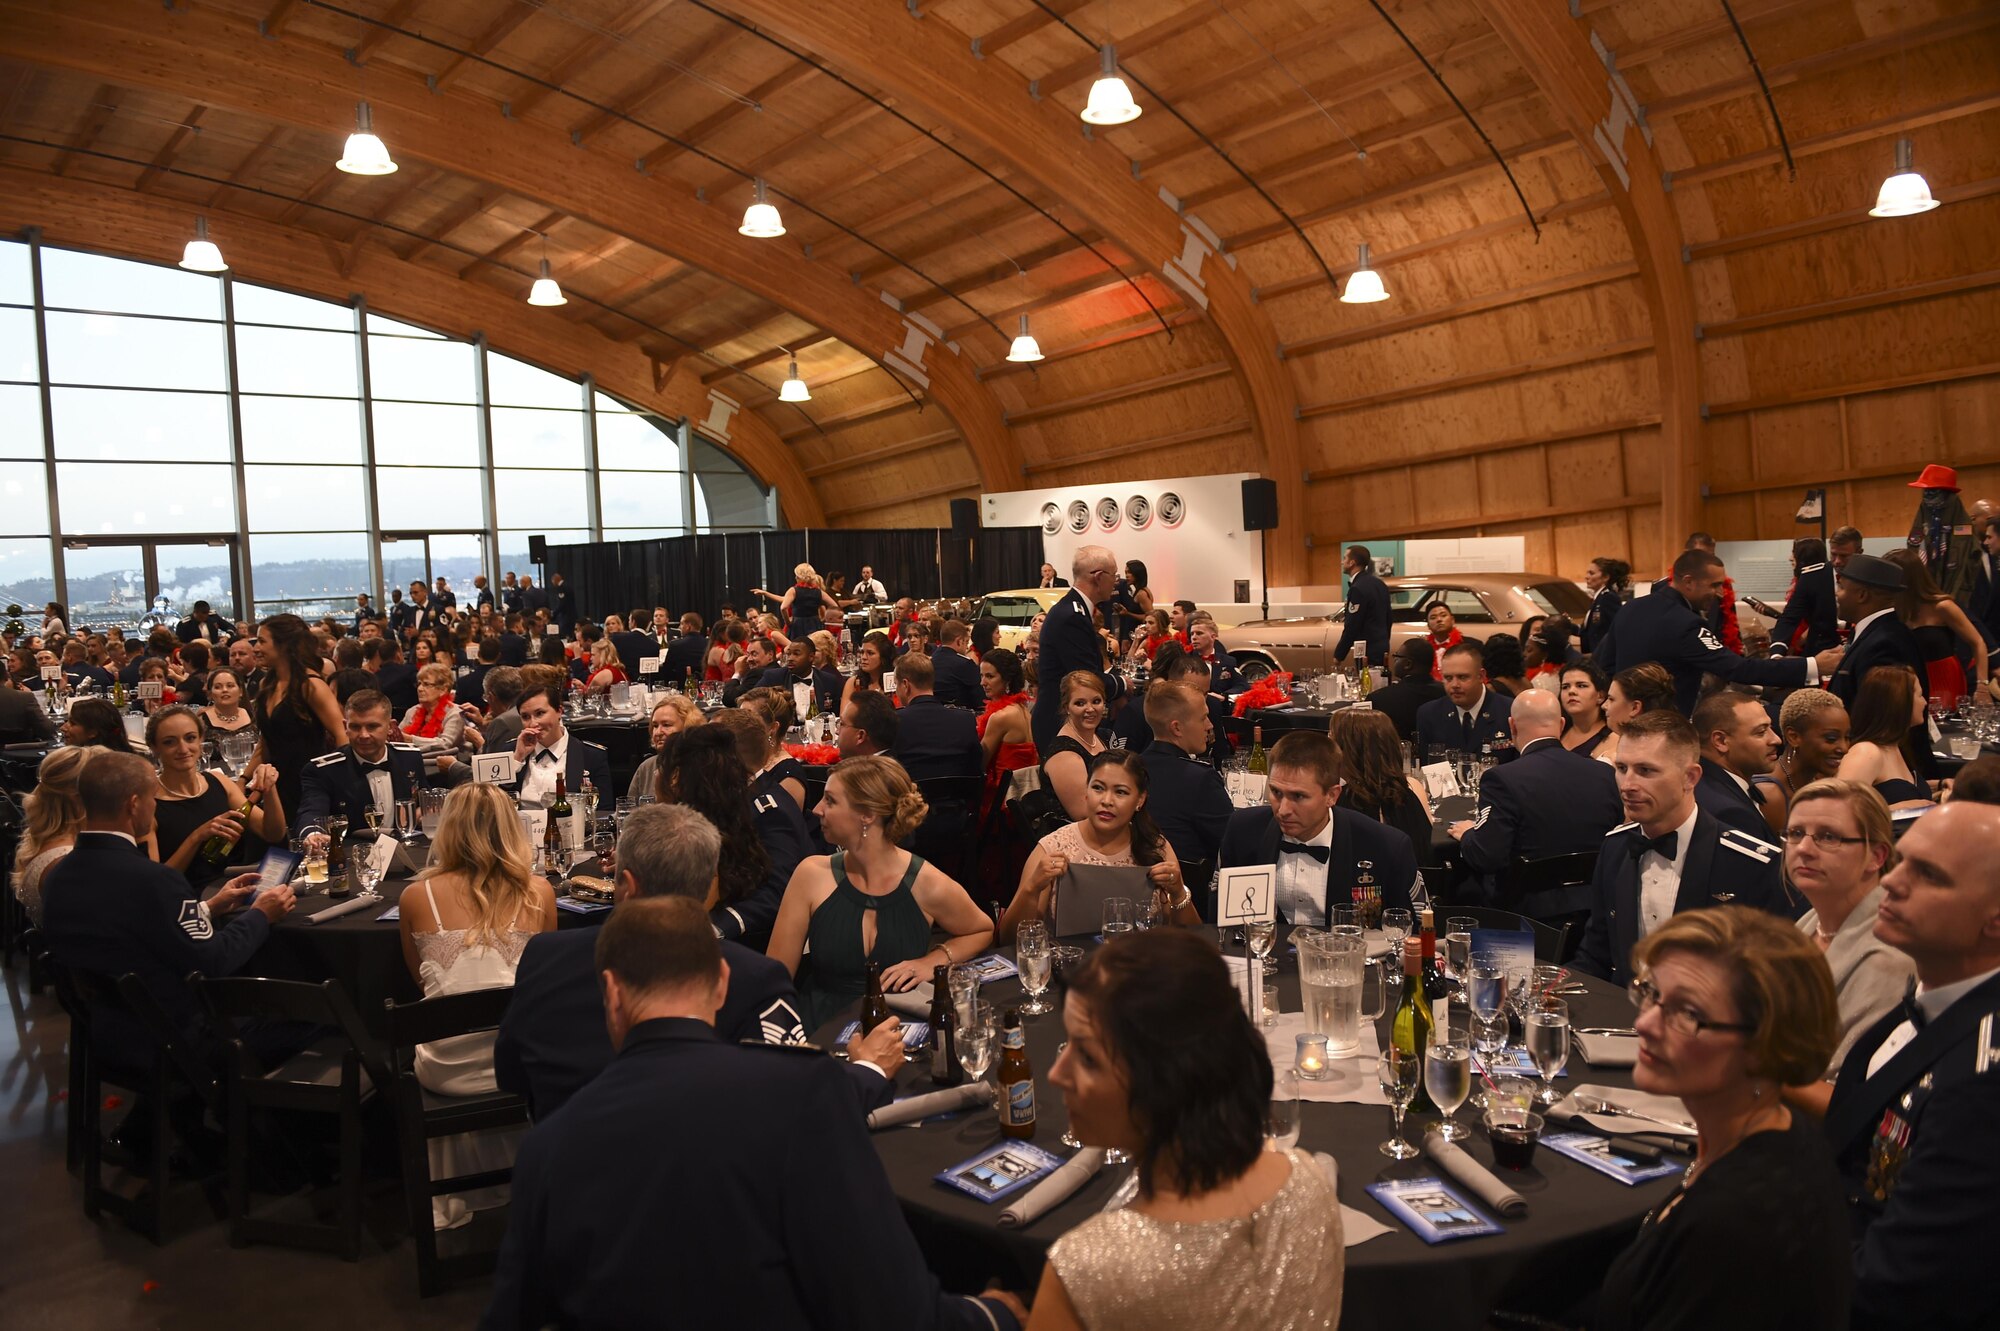 McChord Air Force Ball guests sit inside the Lemay America’s Car Museum in Tacoma, Wash., Sept. 23, 2016. Approximately 500 attendees recognized the history, celebrating the birthday of the United States Air Force in a time honored tradition, the Air Force Ball. (U.S. Air Force photo/Staff Sgt. Naomi Shipley)